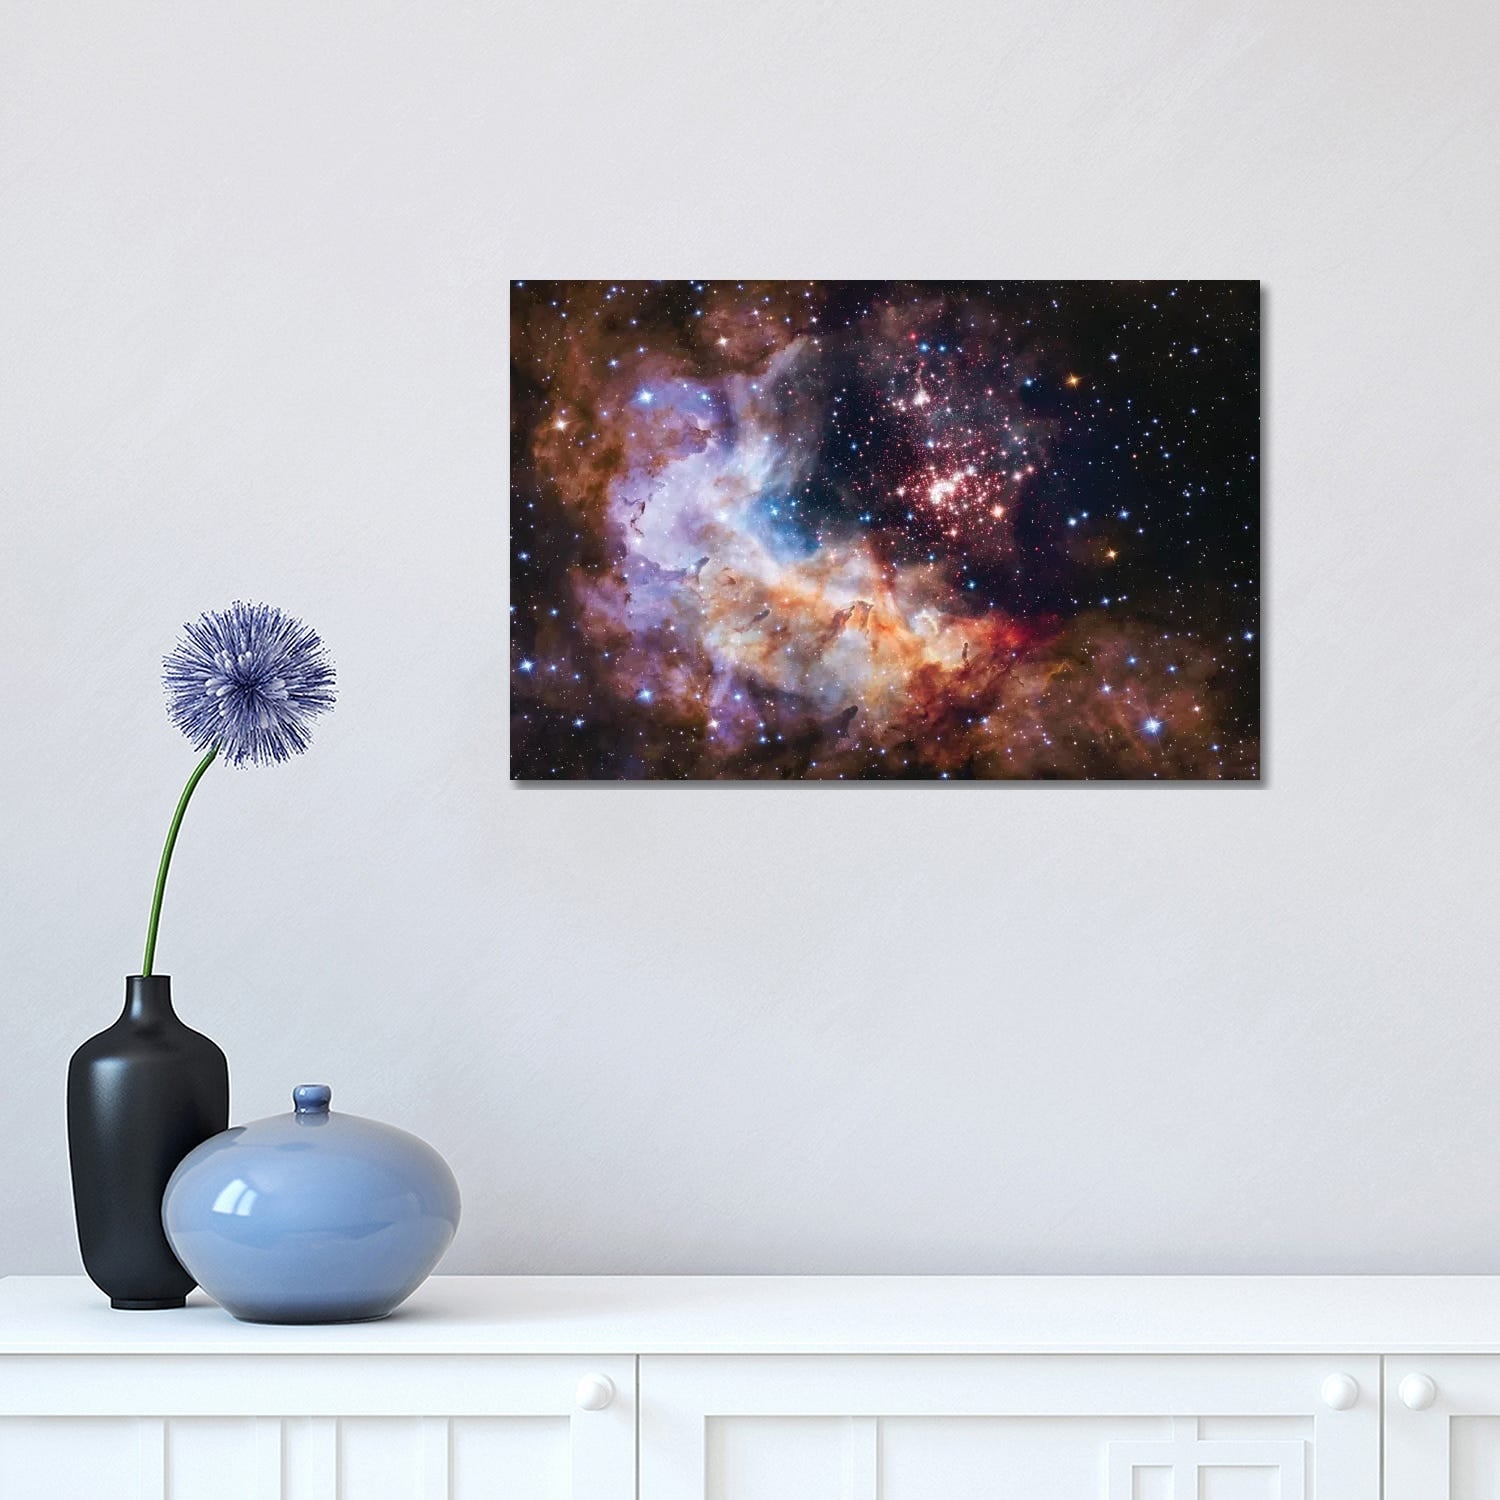 iCanvasART 1-Piece Mystic Mountain in Carina Nebula Hubble Space Telescope Canvas Print by NASA 0.75 x 26 x 18-Inch 